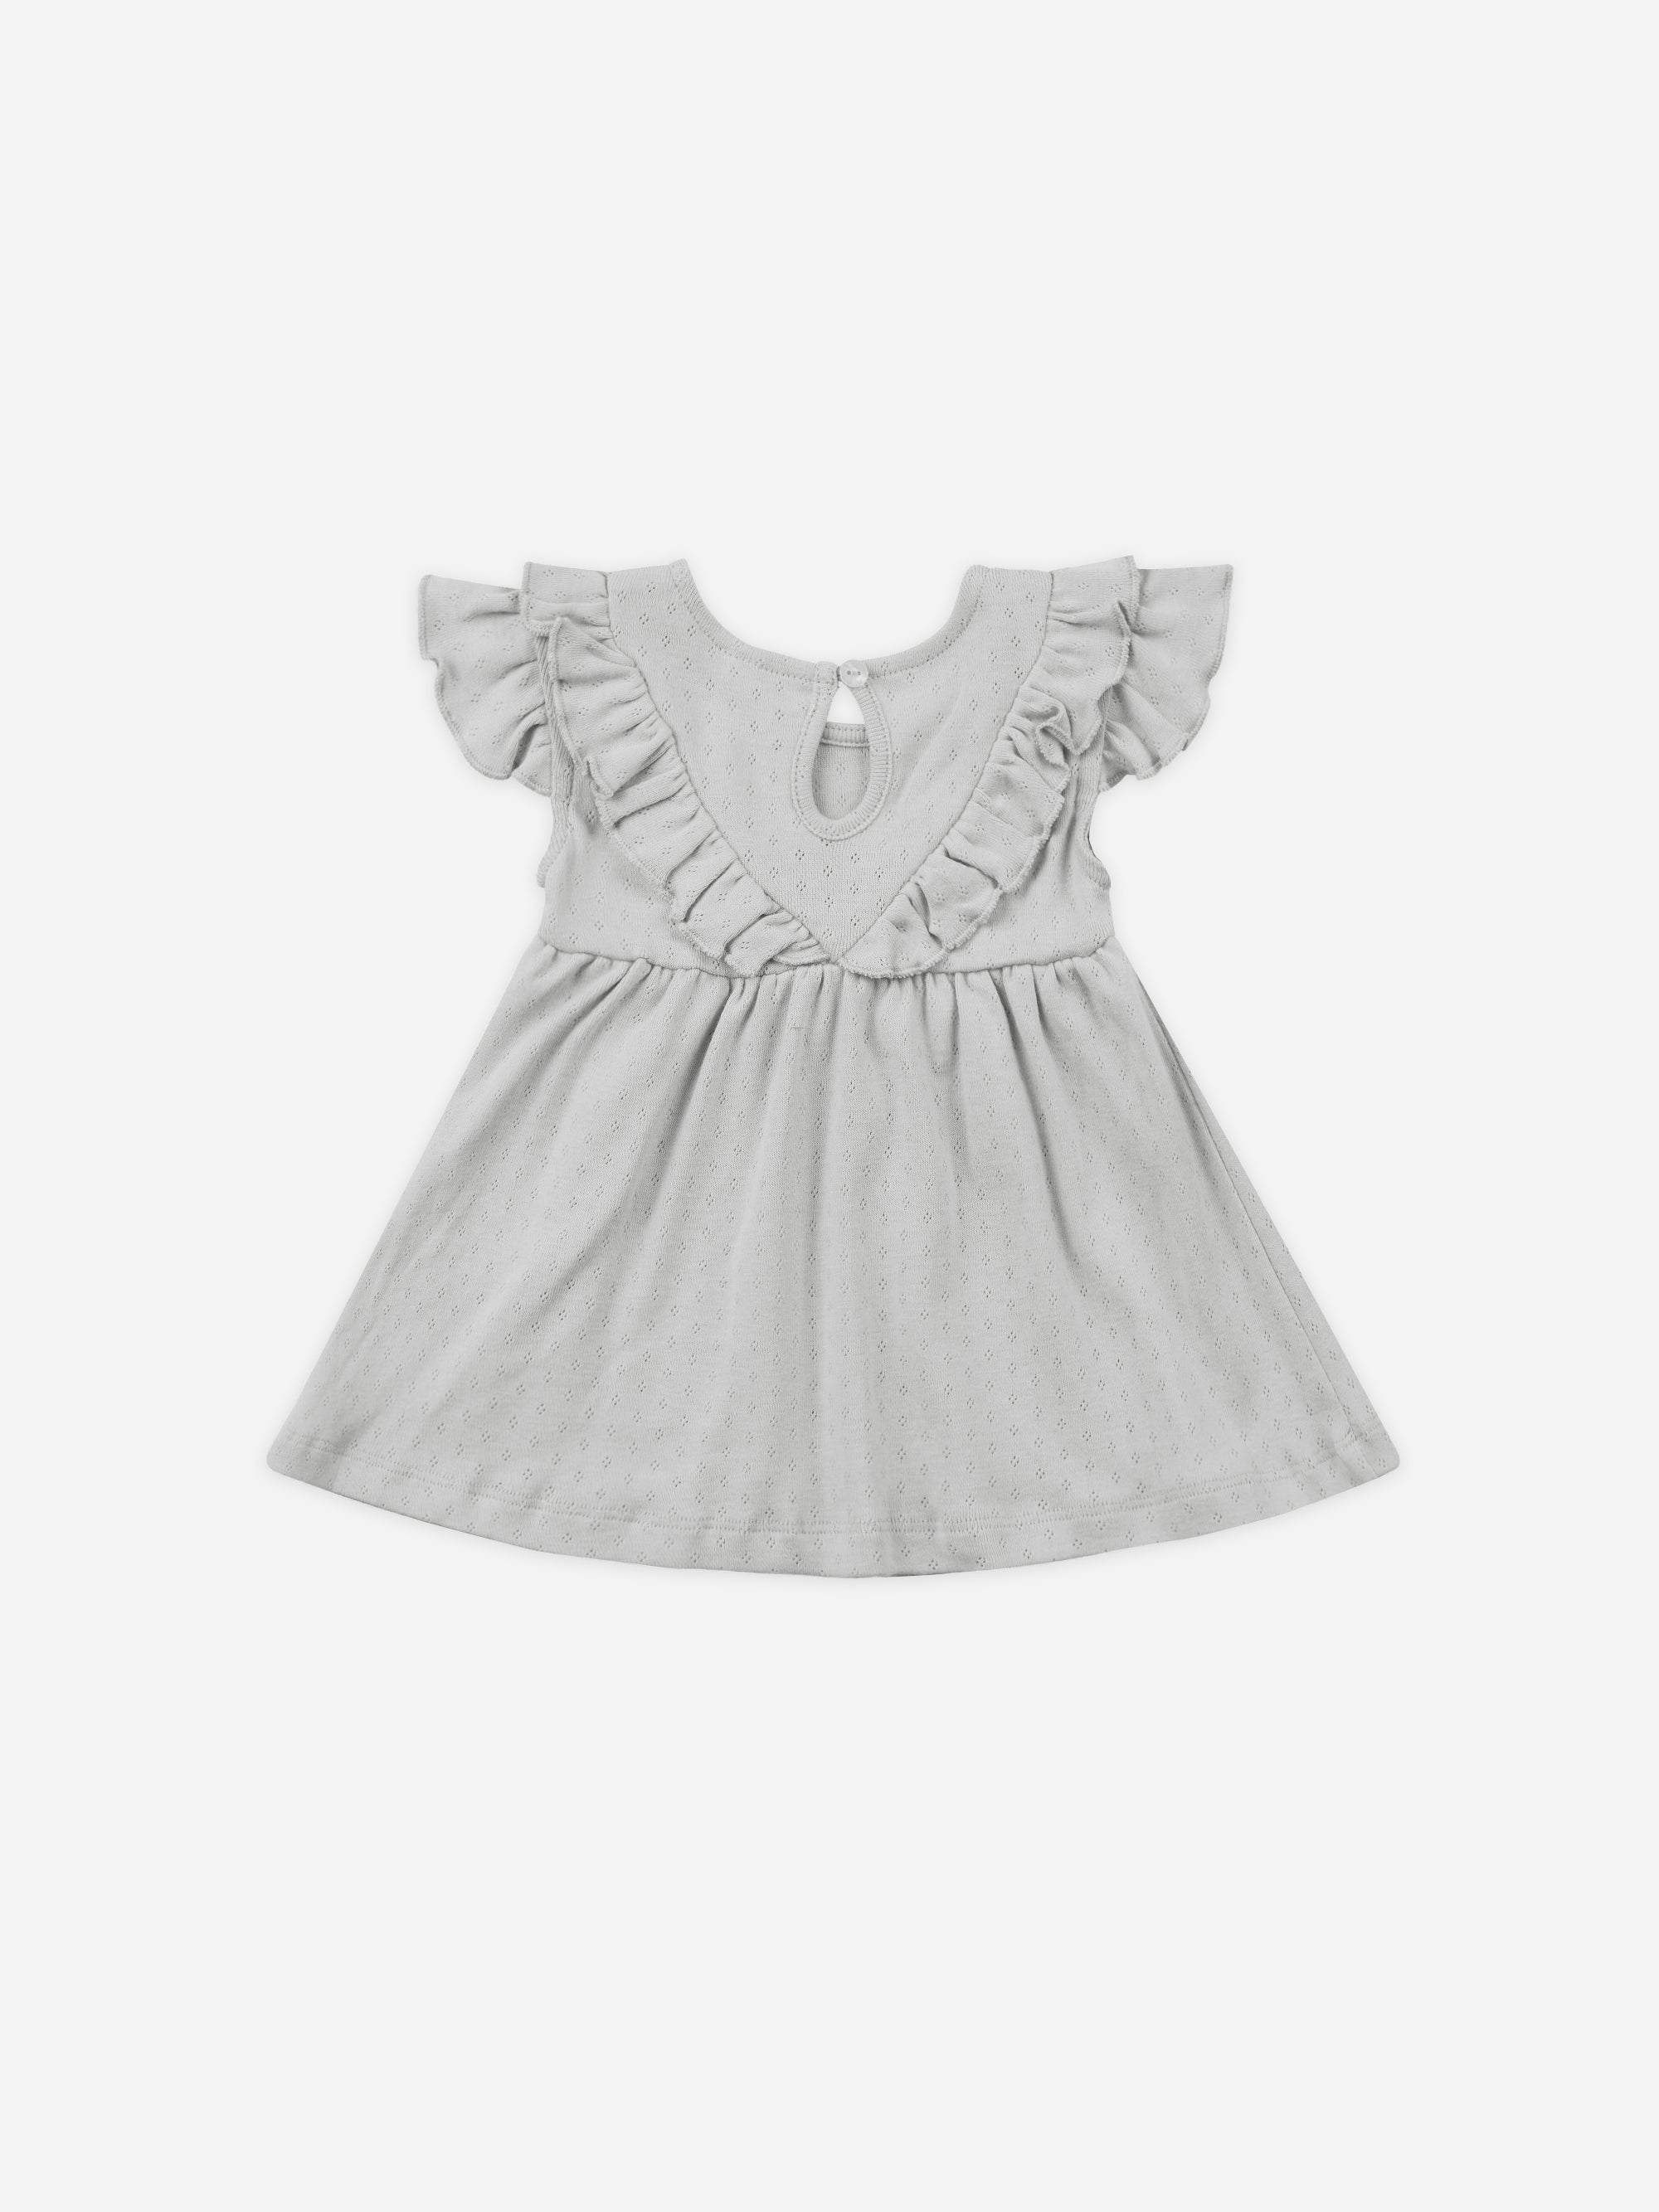 Sleeveless Ruffle V Dress || Cloud - Rylee + Cru | Kids Clothes | Trendy Baby Clothes | Modern Infant Outfits |